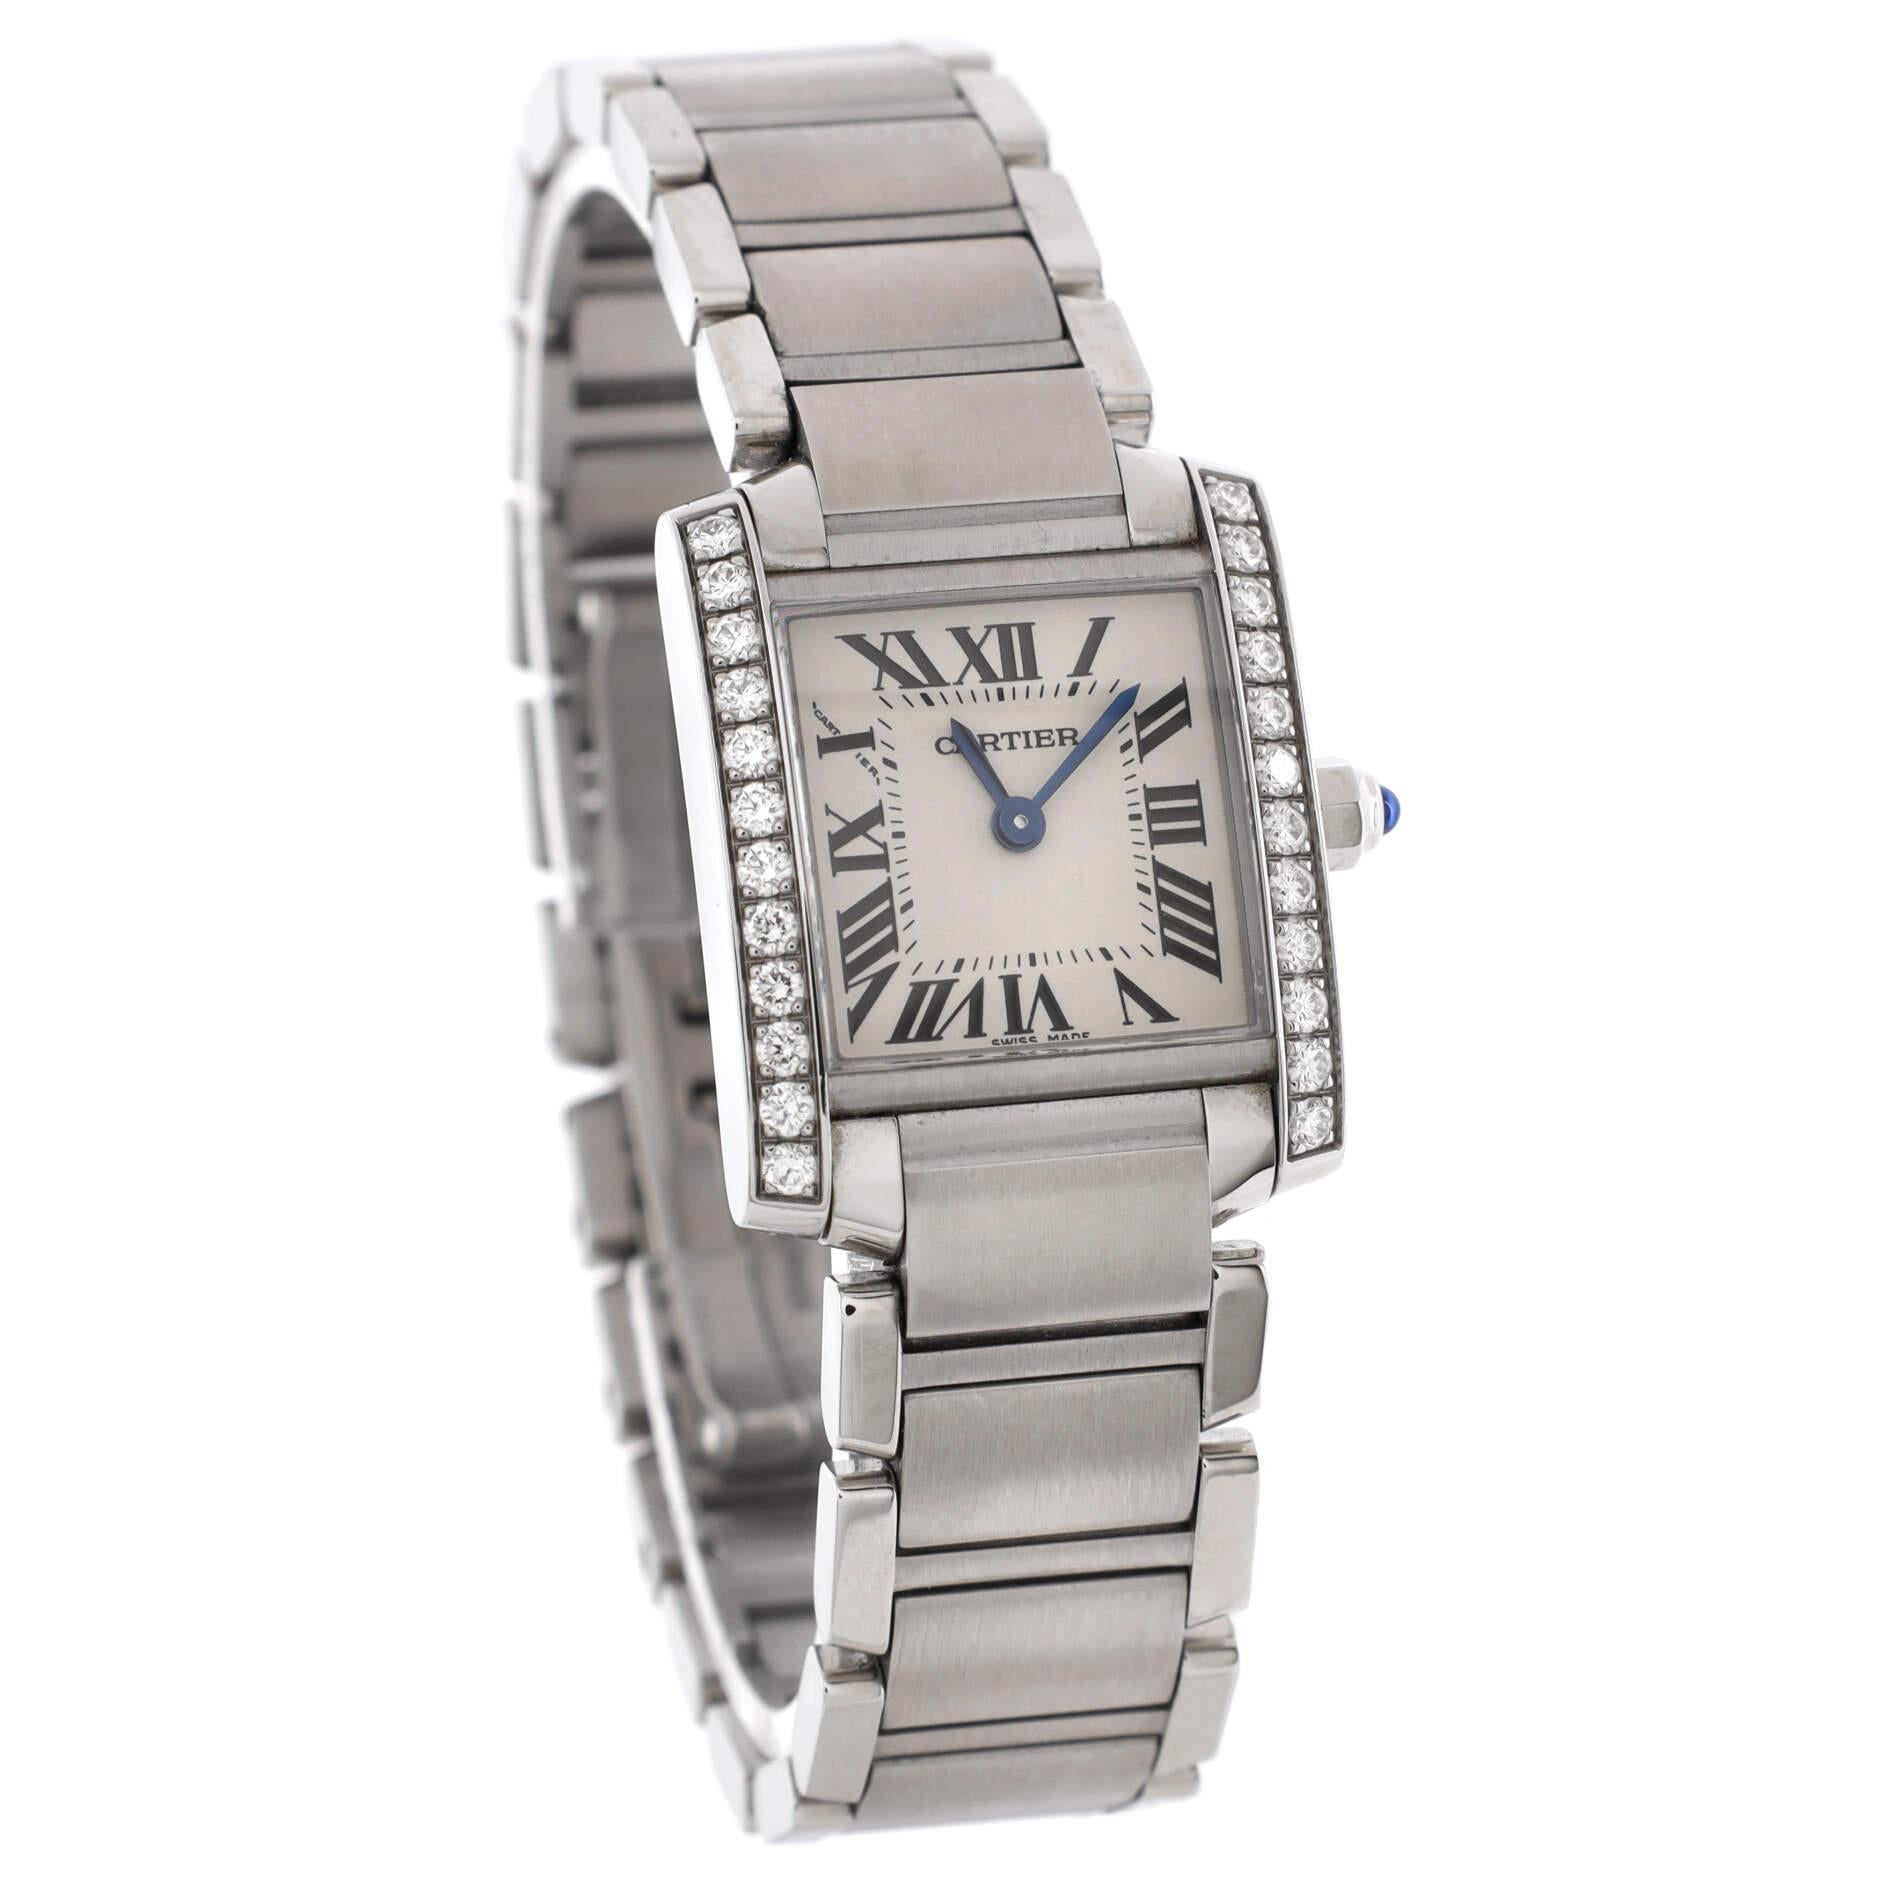 Condition: Great. Moderate scratches and wear throughout. Wear and scratches on case and bracelet.
Accessories: No Accessories
Measurements: Case Size/Width: 20mm, Watch Height: 6mm, Band Width: 15mm, Wrist circumference: 5.75